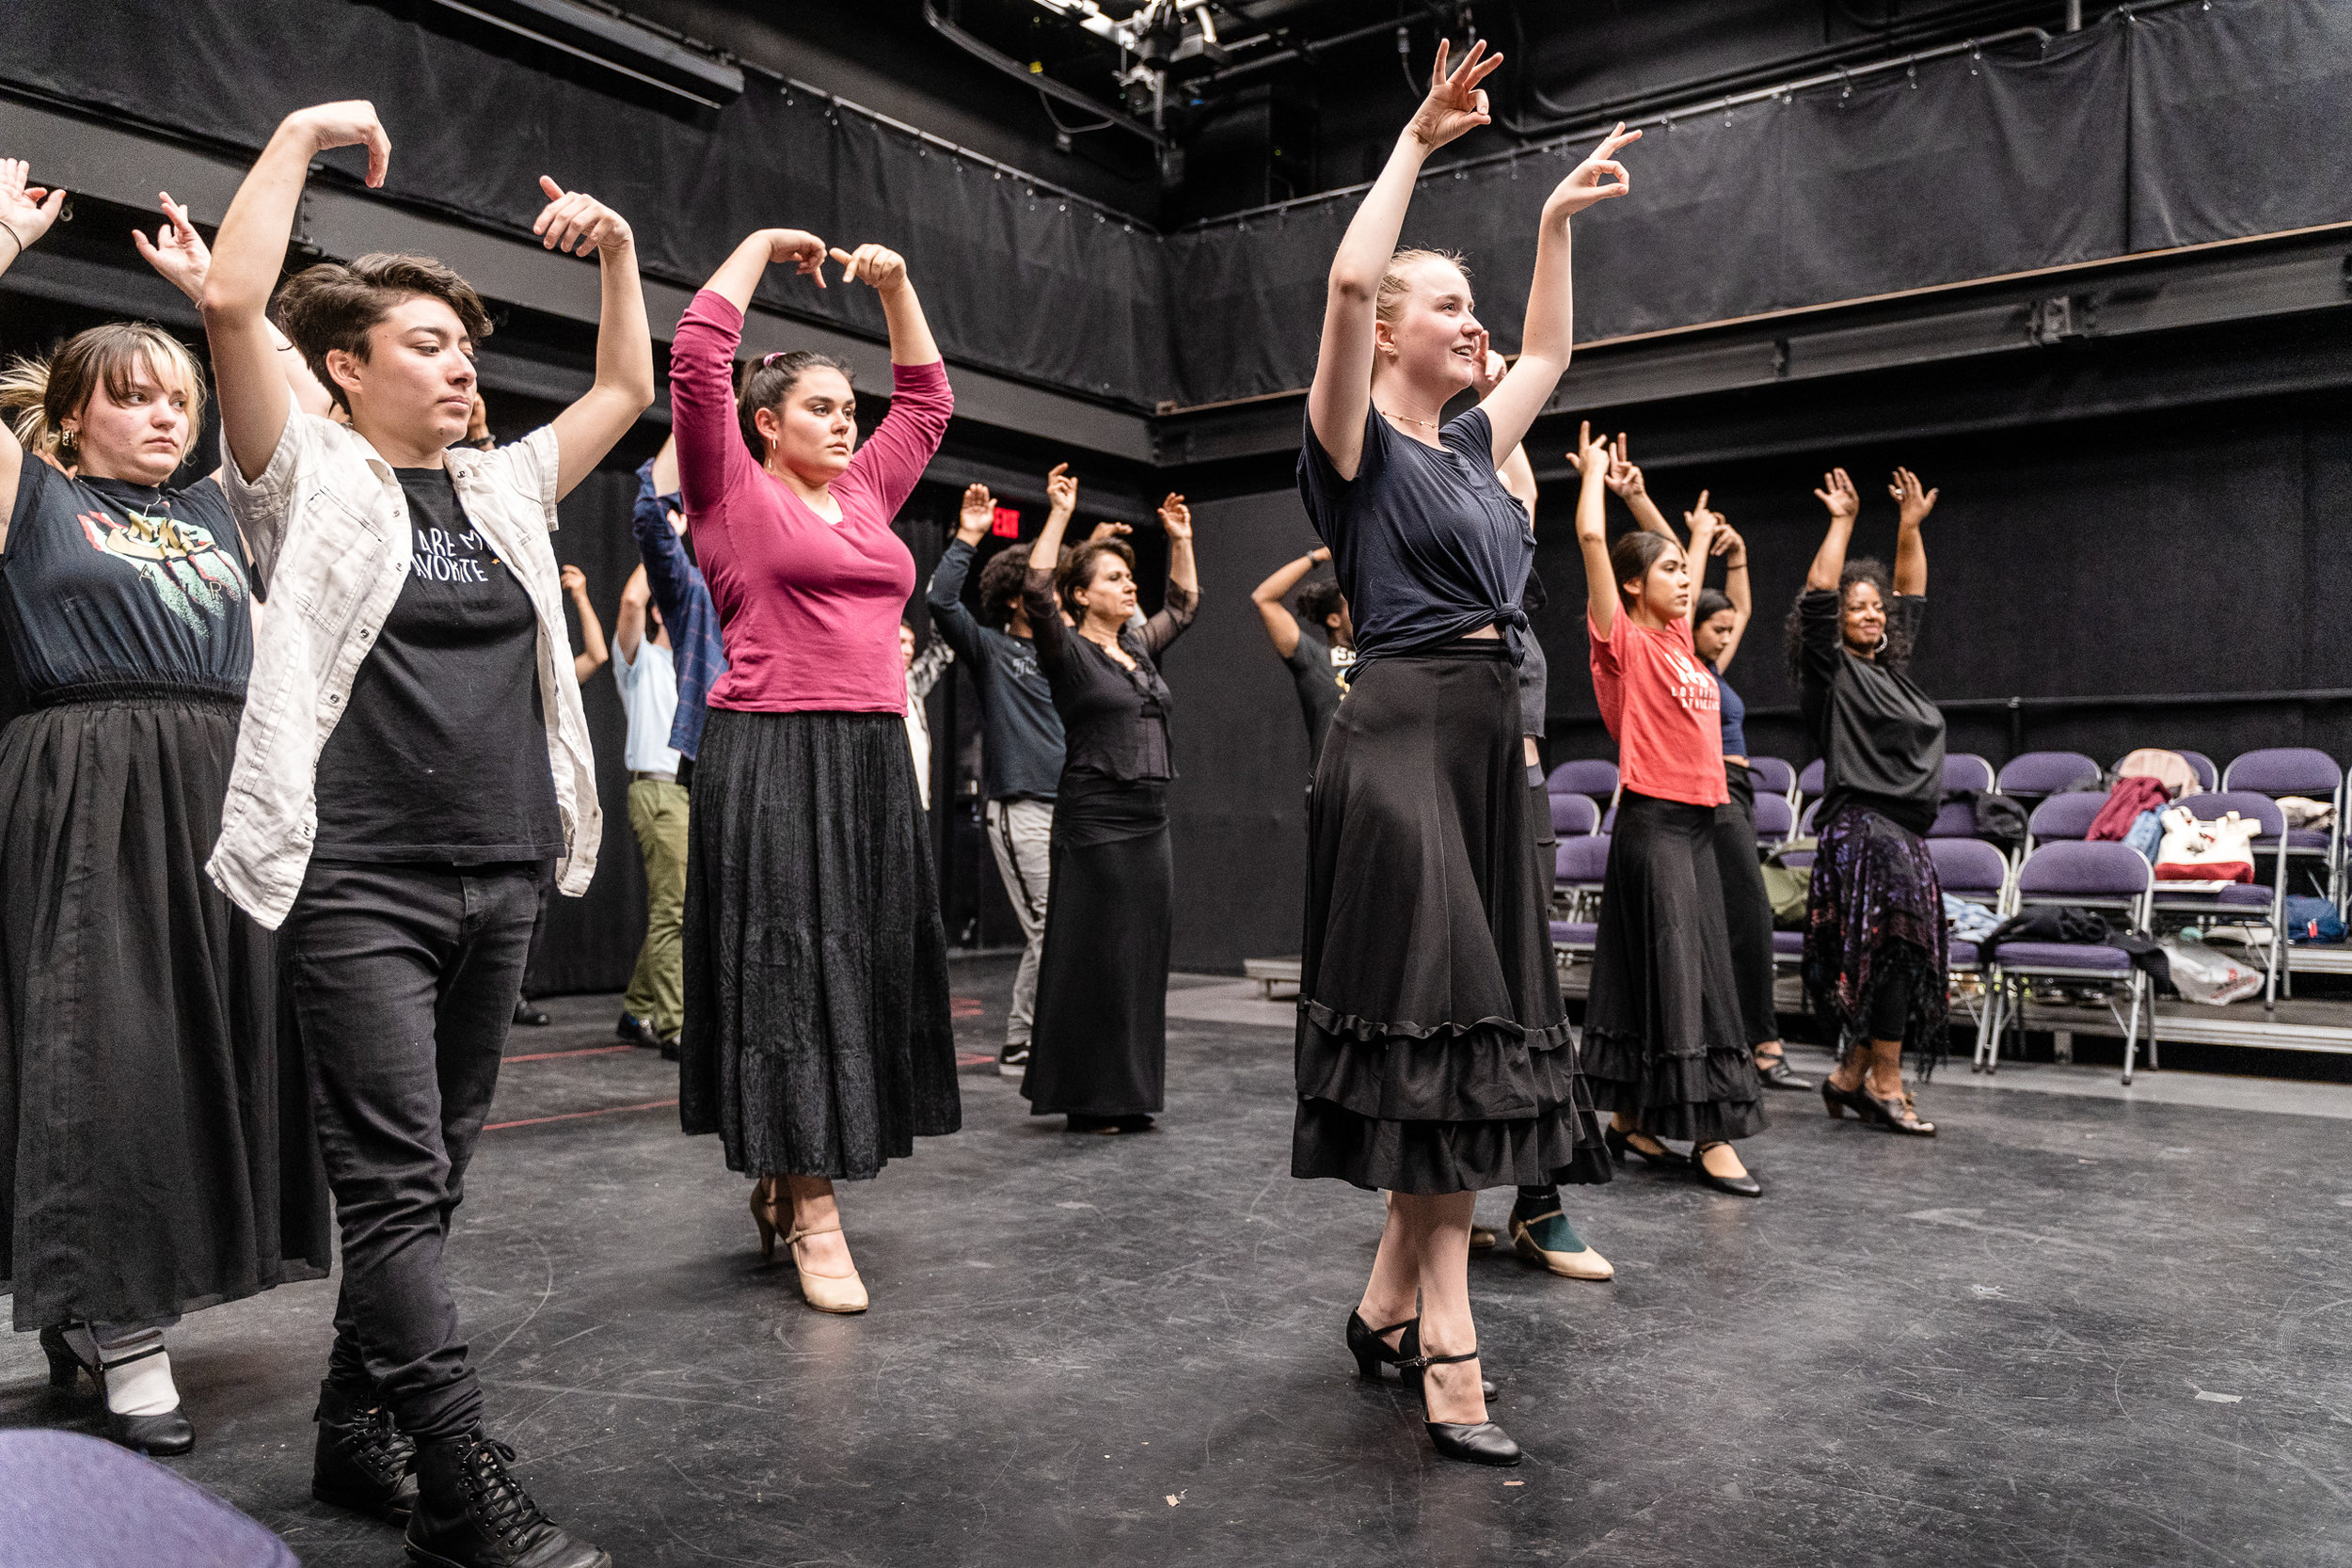  The cast of Flamenco Macbeth, an adaptation of William Shakespeare’s Macbeth by SMC Theatre Arts department chair Perviz Sawoski, rehearsing dance moves in SMC’s Studio Stage on Thursday, March 21, 2019. Flamenco Macbeth will premiere and run in thi